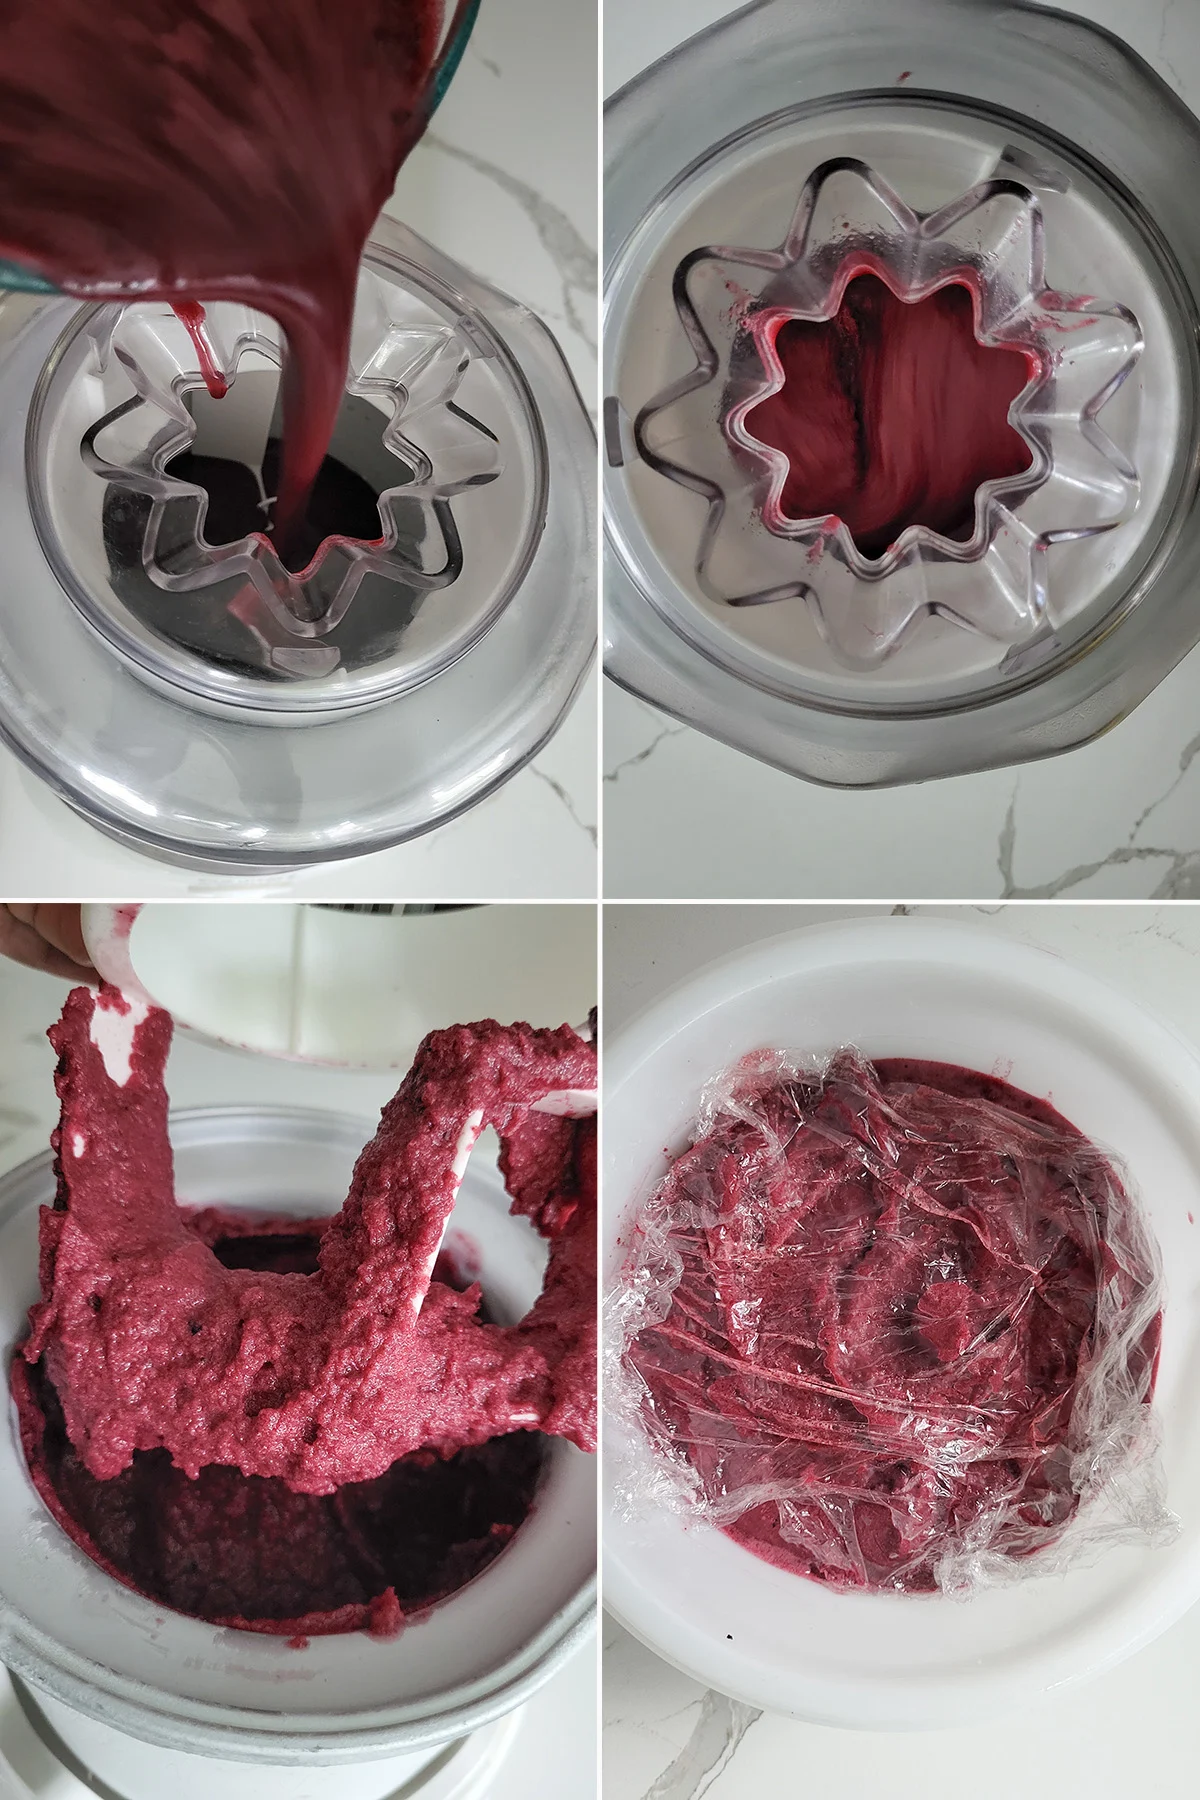 Grape puree pouring into an ice cream machine. Grape sorbet on an ice cream machine baffle. A container of grape sorbet covered in plastic wrap.